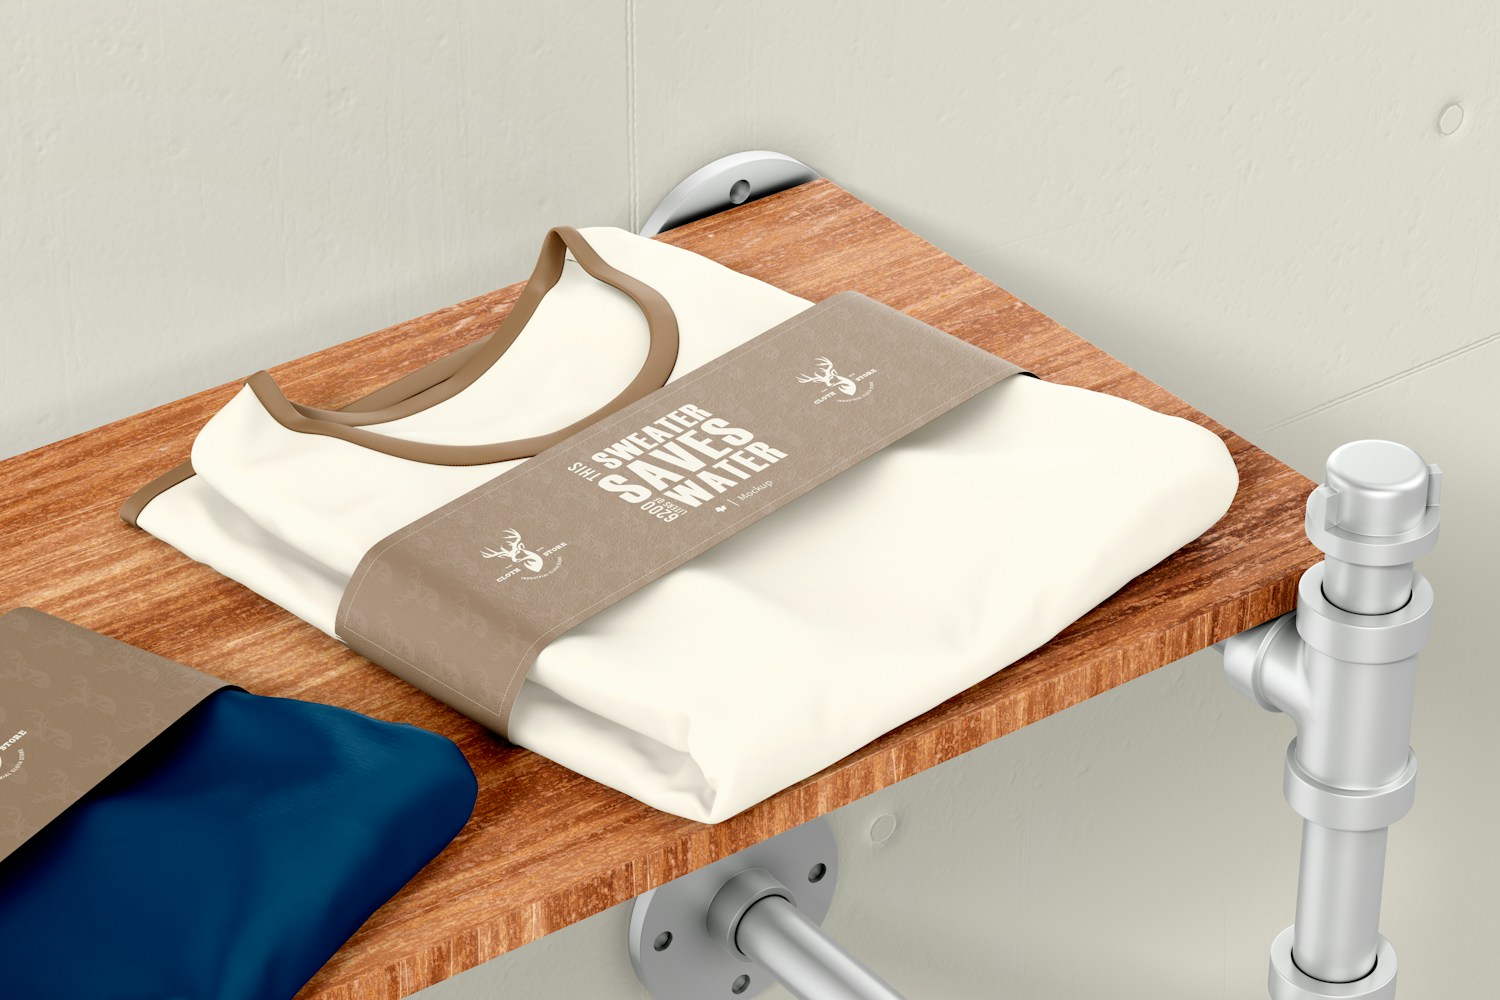 T Shirts with Label Mockup